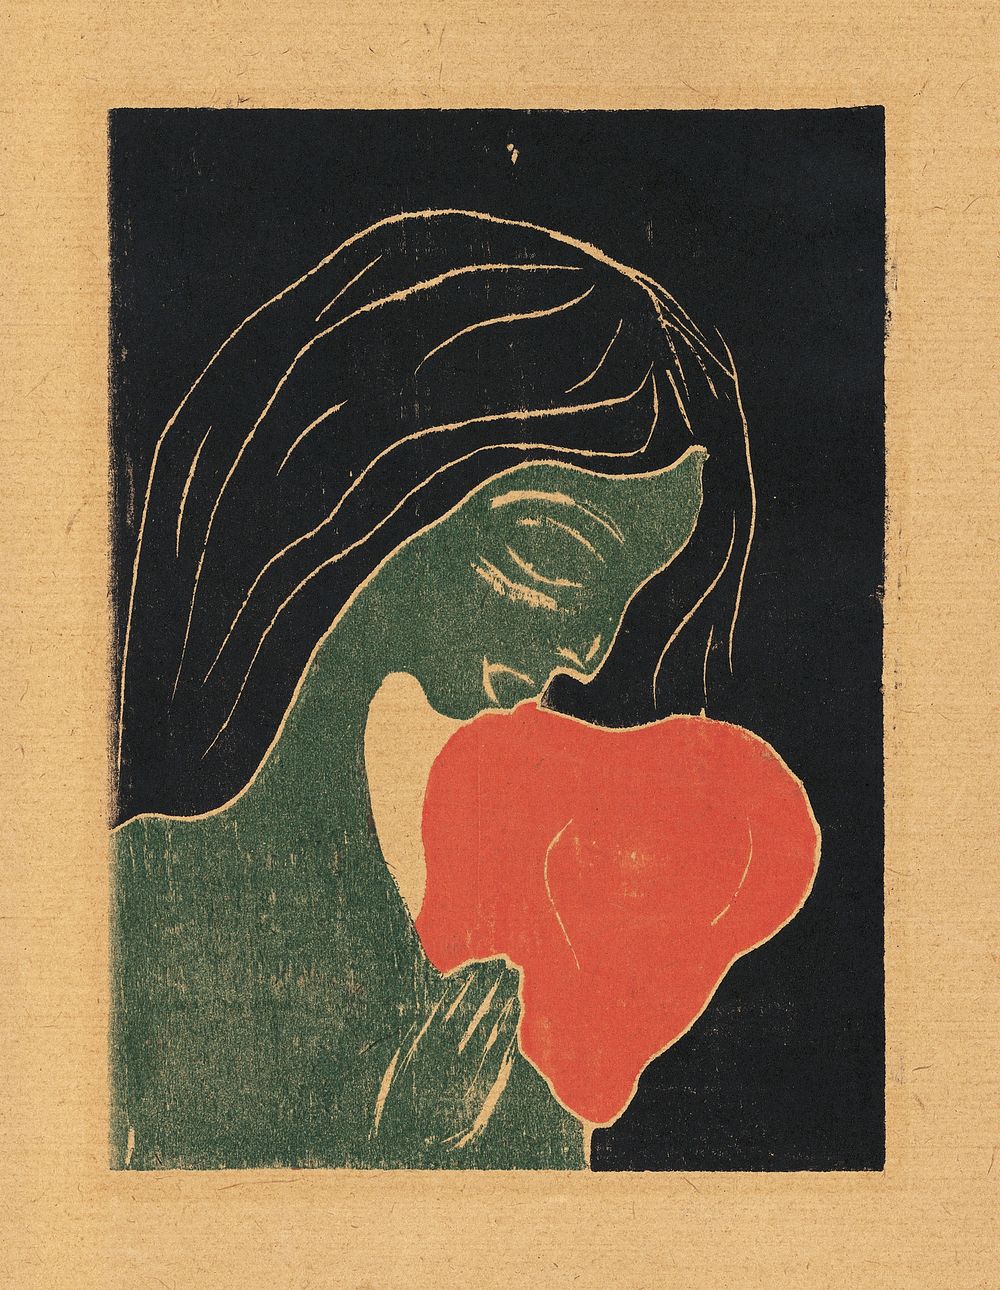 Edvard Munch's The Heart (1898&ndash;1899) famous painting. Original public domain image from the Kunstmuseum Basel Museum.…